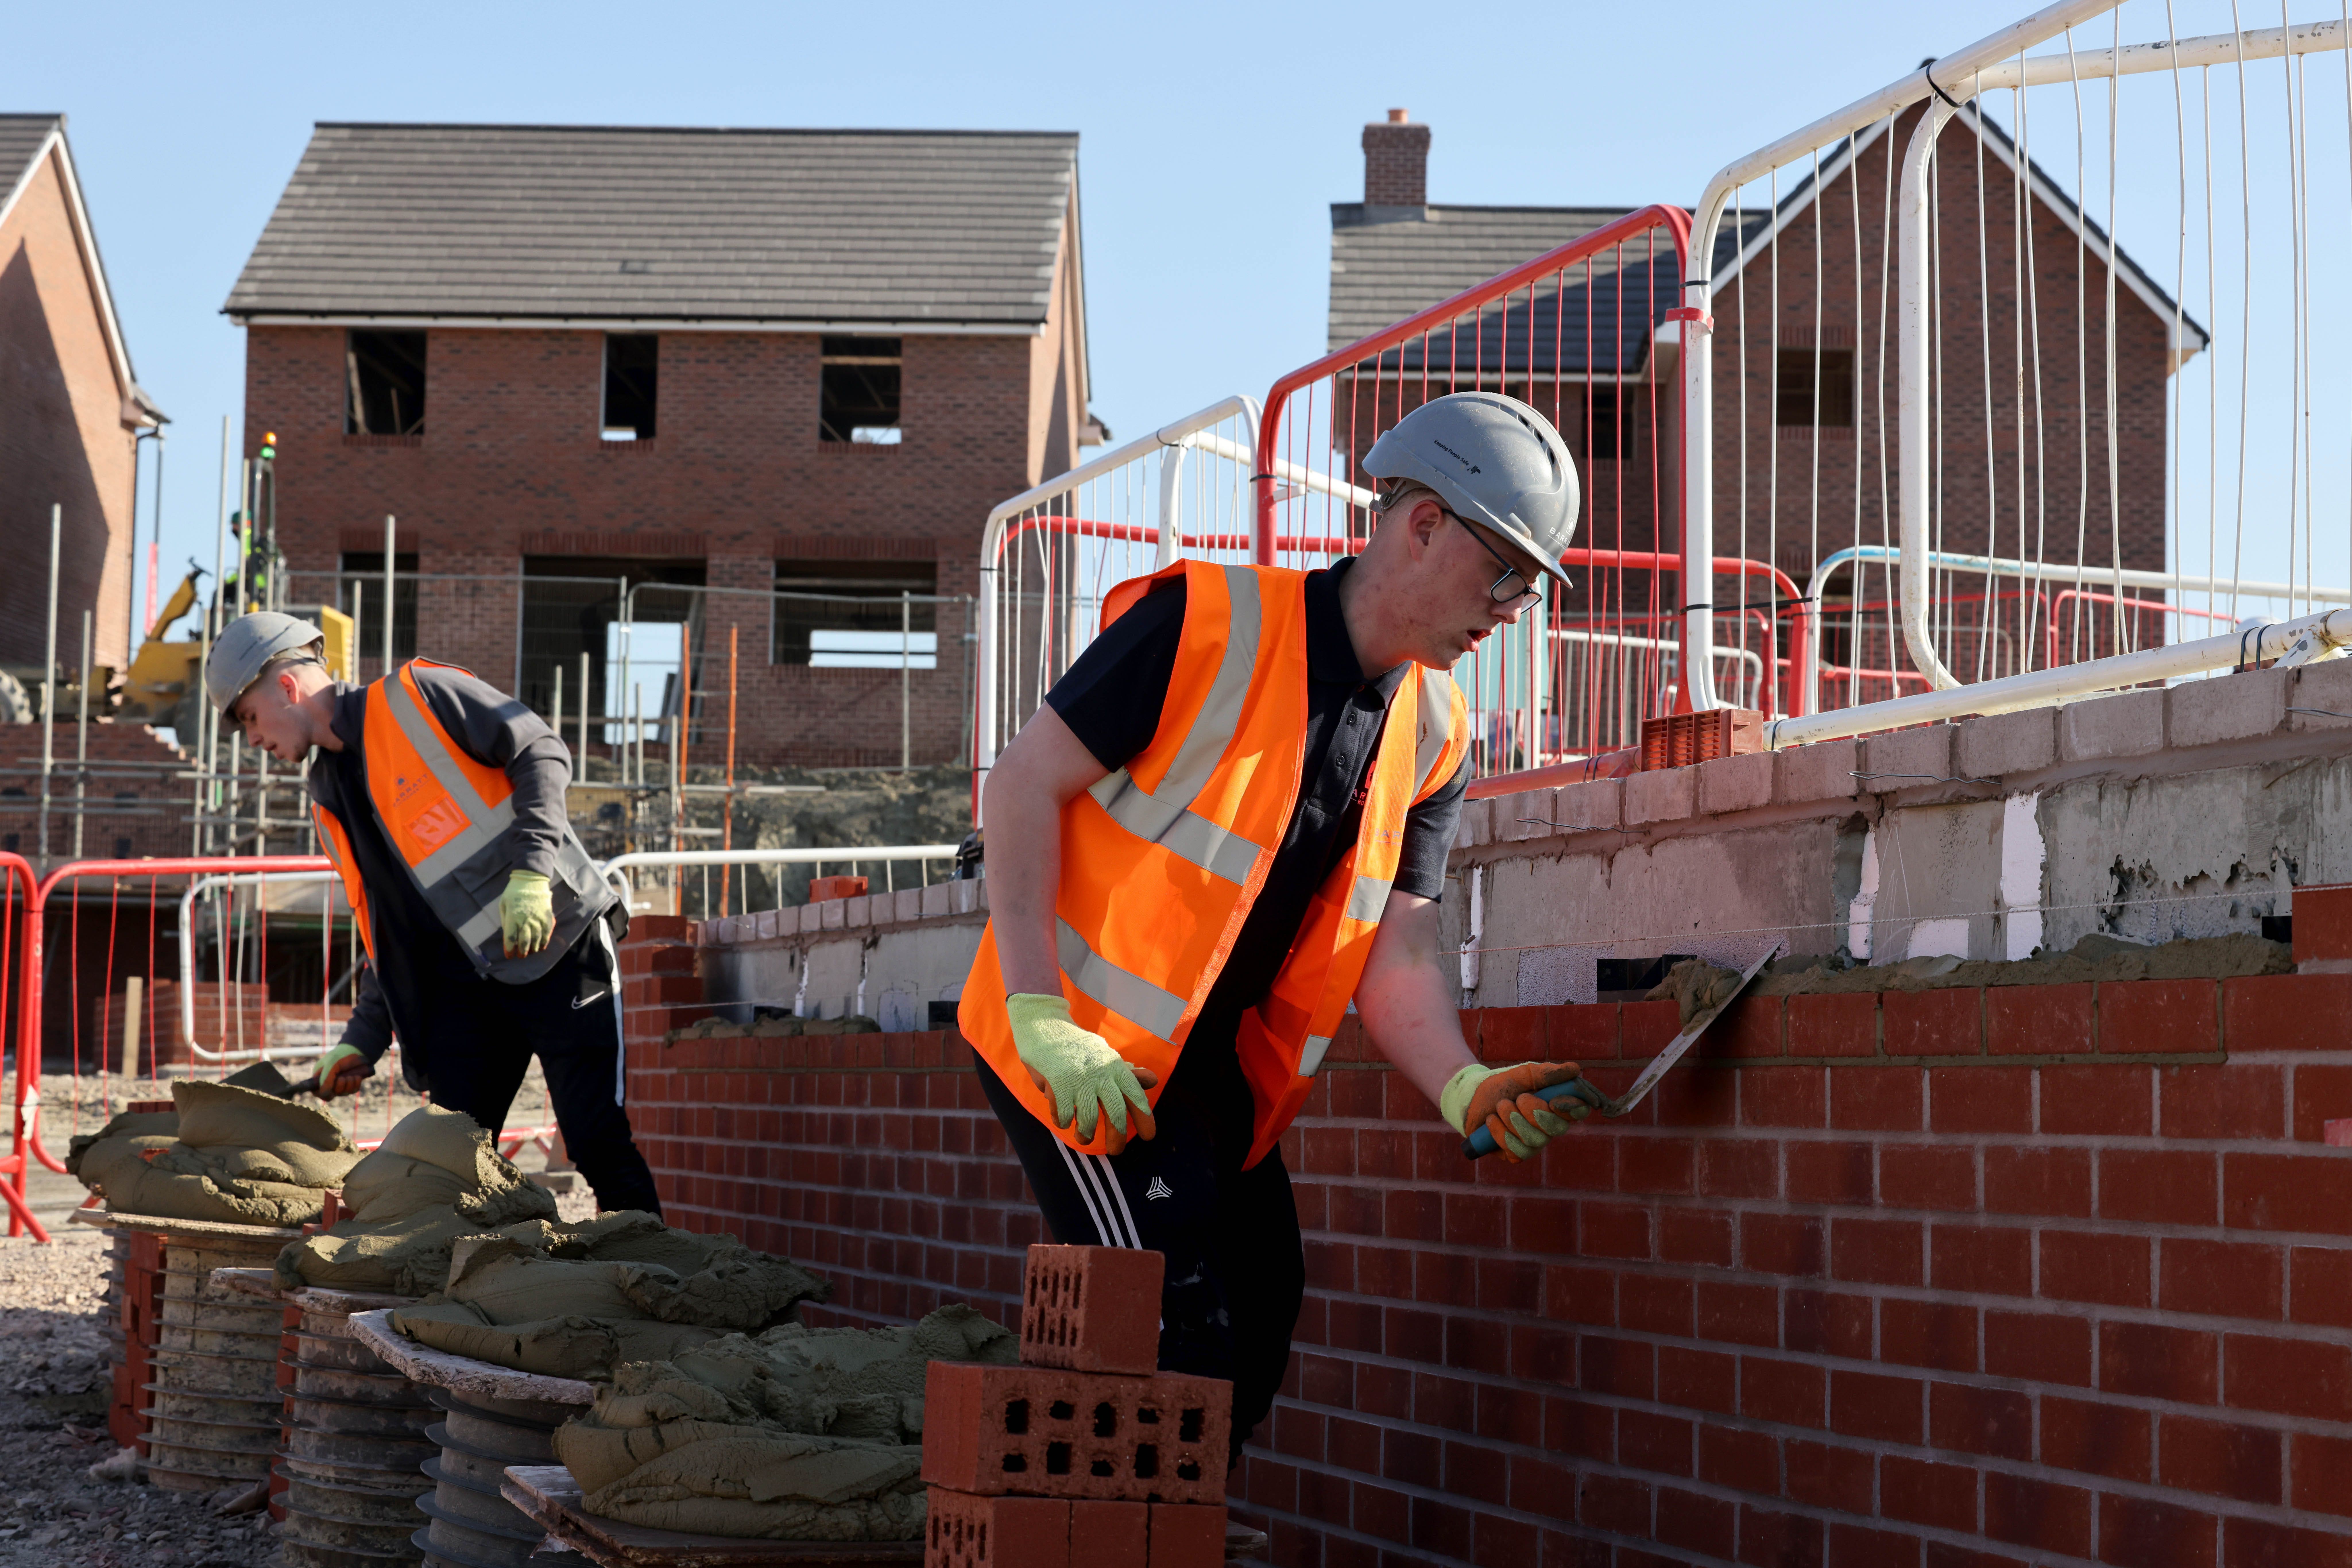 Housebuilder Barratt Developments has warned the property market will remain “difficult” as higher mortgage costs hit demand (PA)